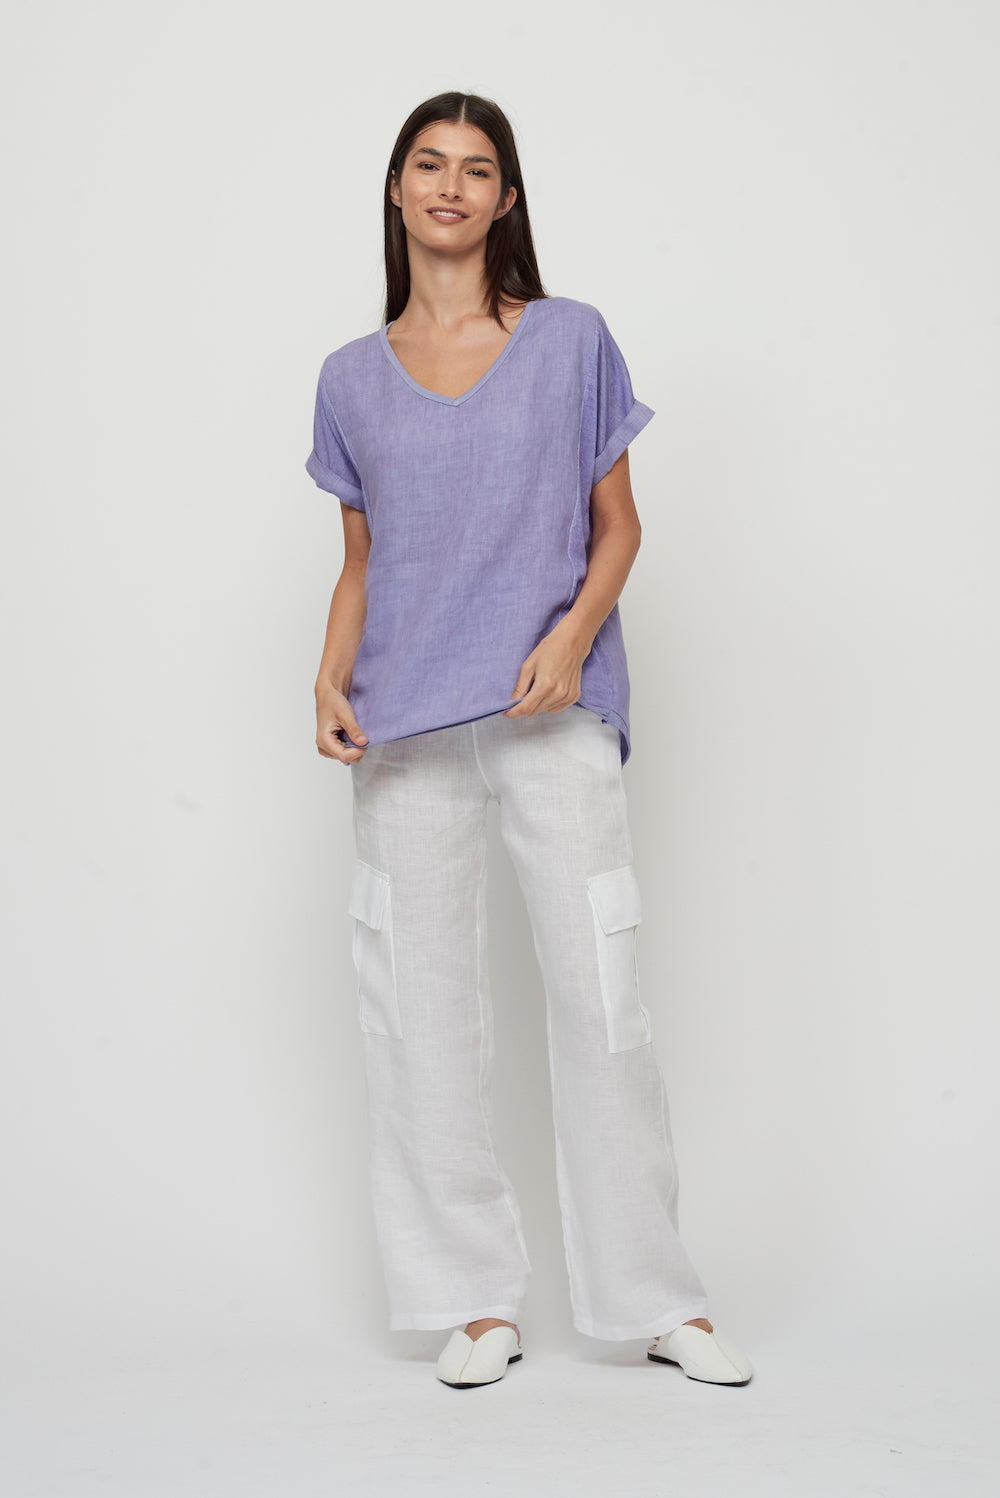 Pistache SS Linen Woven Top - Lilac Clothing - Tops - Shirts - SS Knits by Pistache | Grace the Boutique